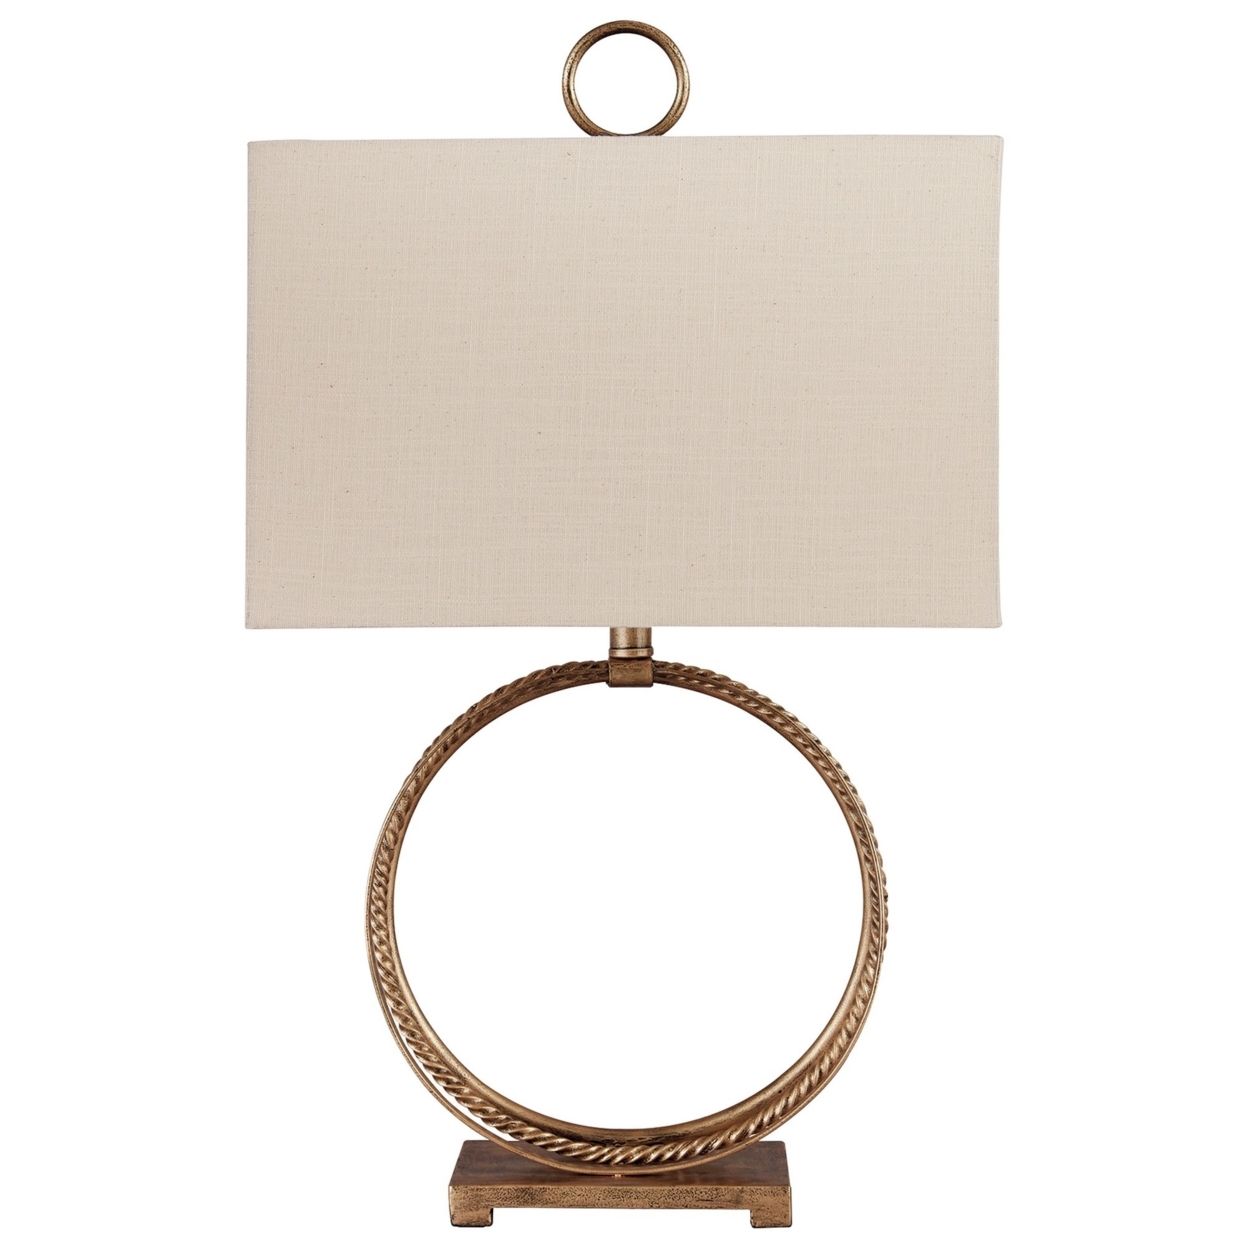 28 Inches Table Lamp With Ring Metal Base, Beige And Gold- Saltoro Sherpi